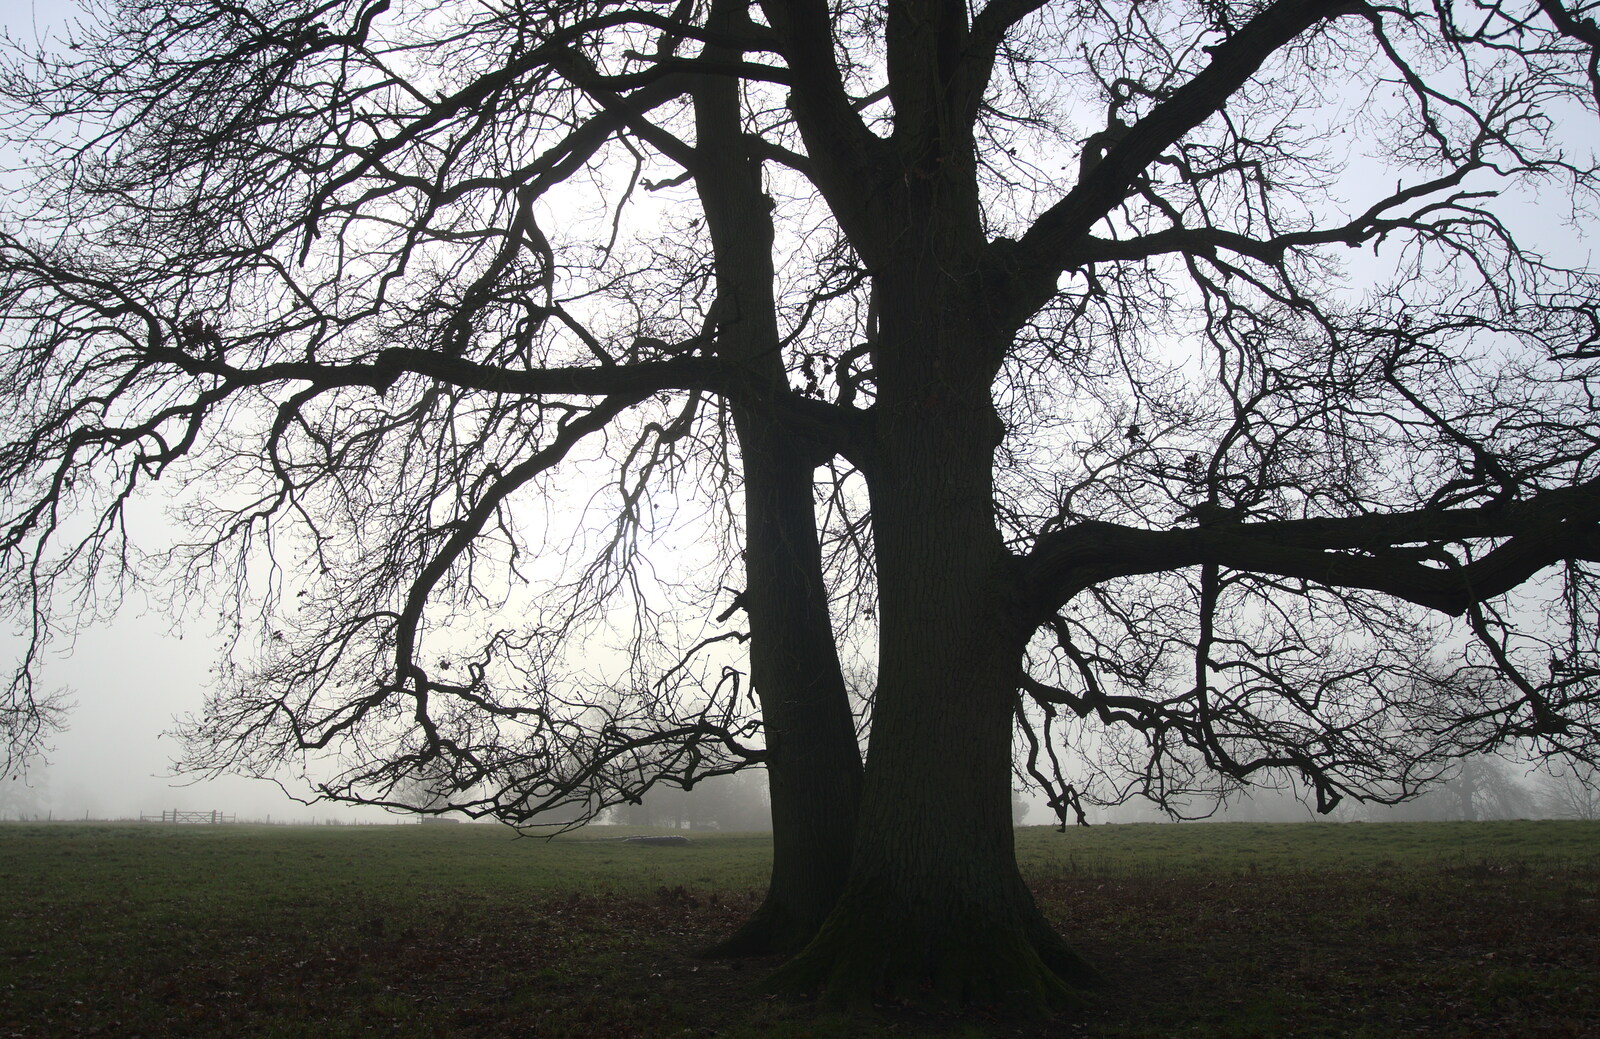 A tree silhouette from A Trip to Ickworth House, Horringer, Suffolk - 30th December 2016